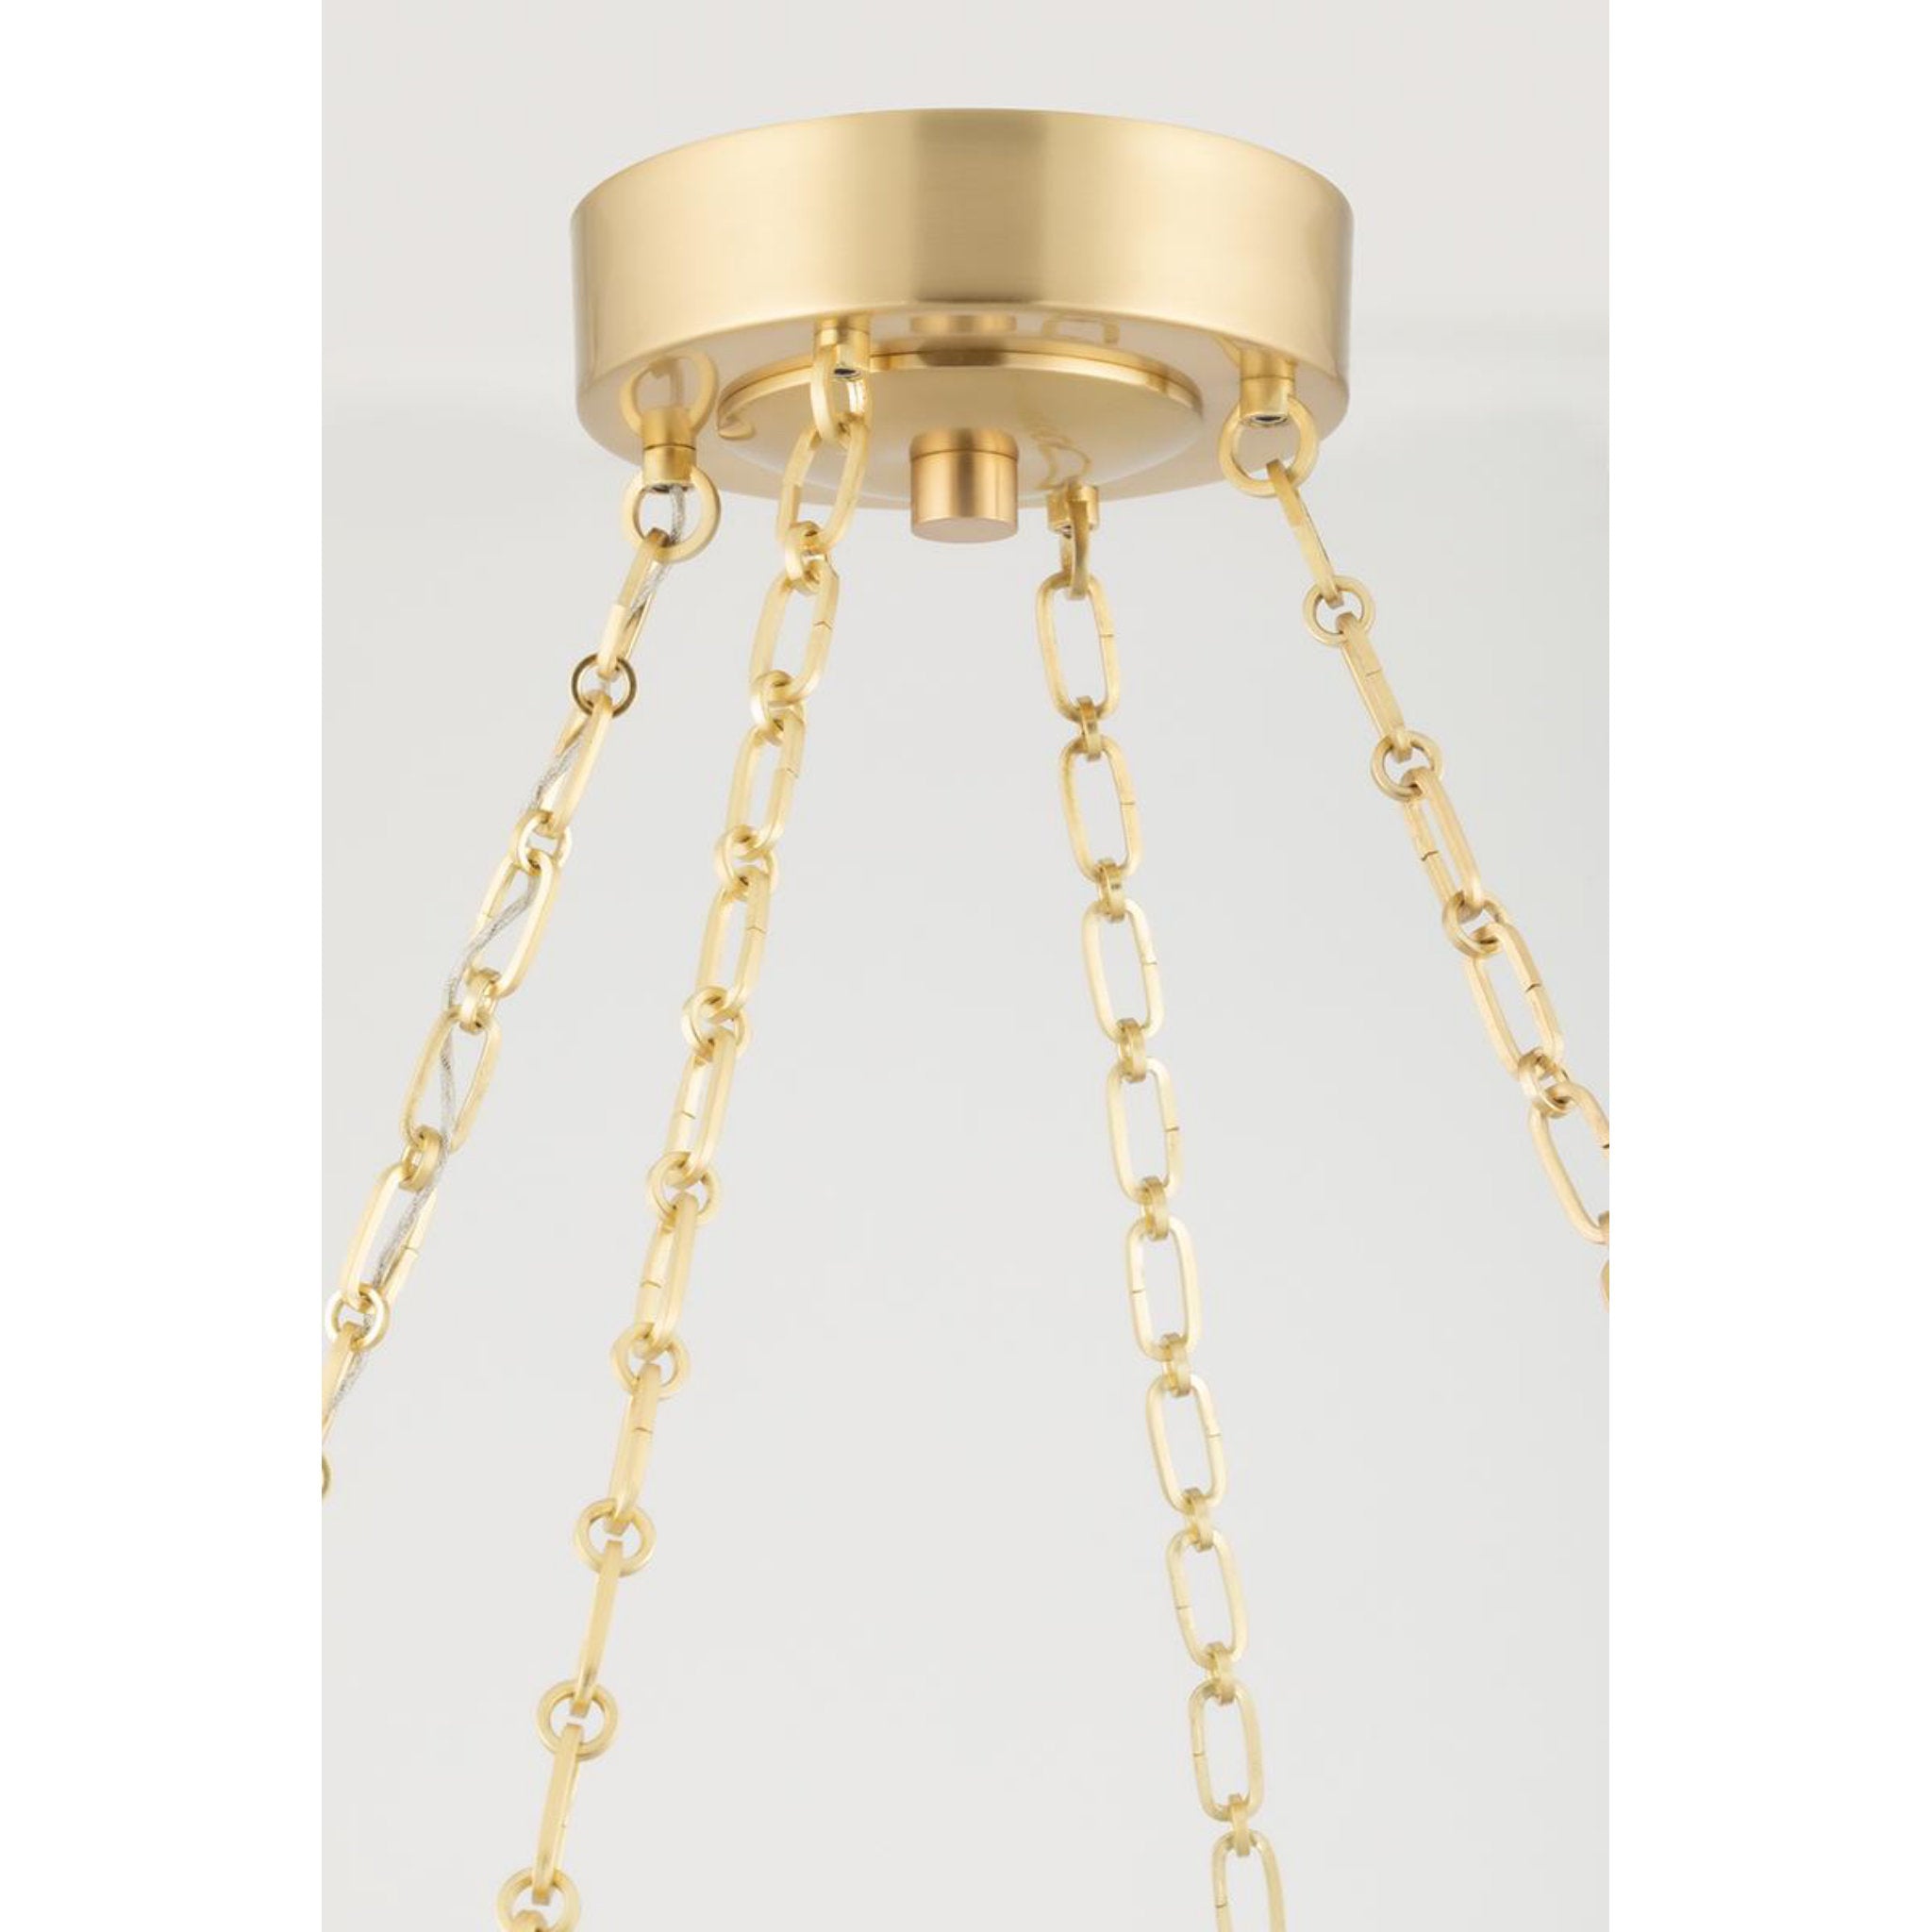 Lindley 6 Light Bath and Vanity in Aged Brass